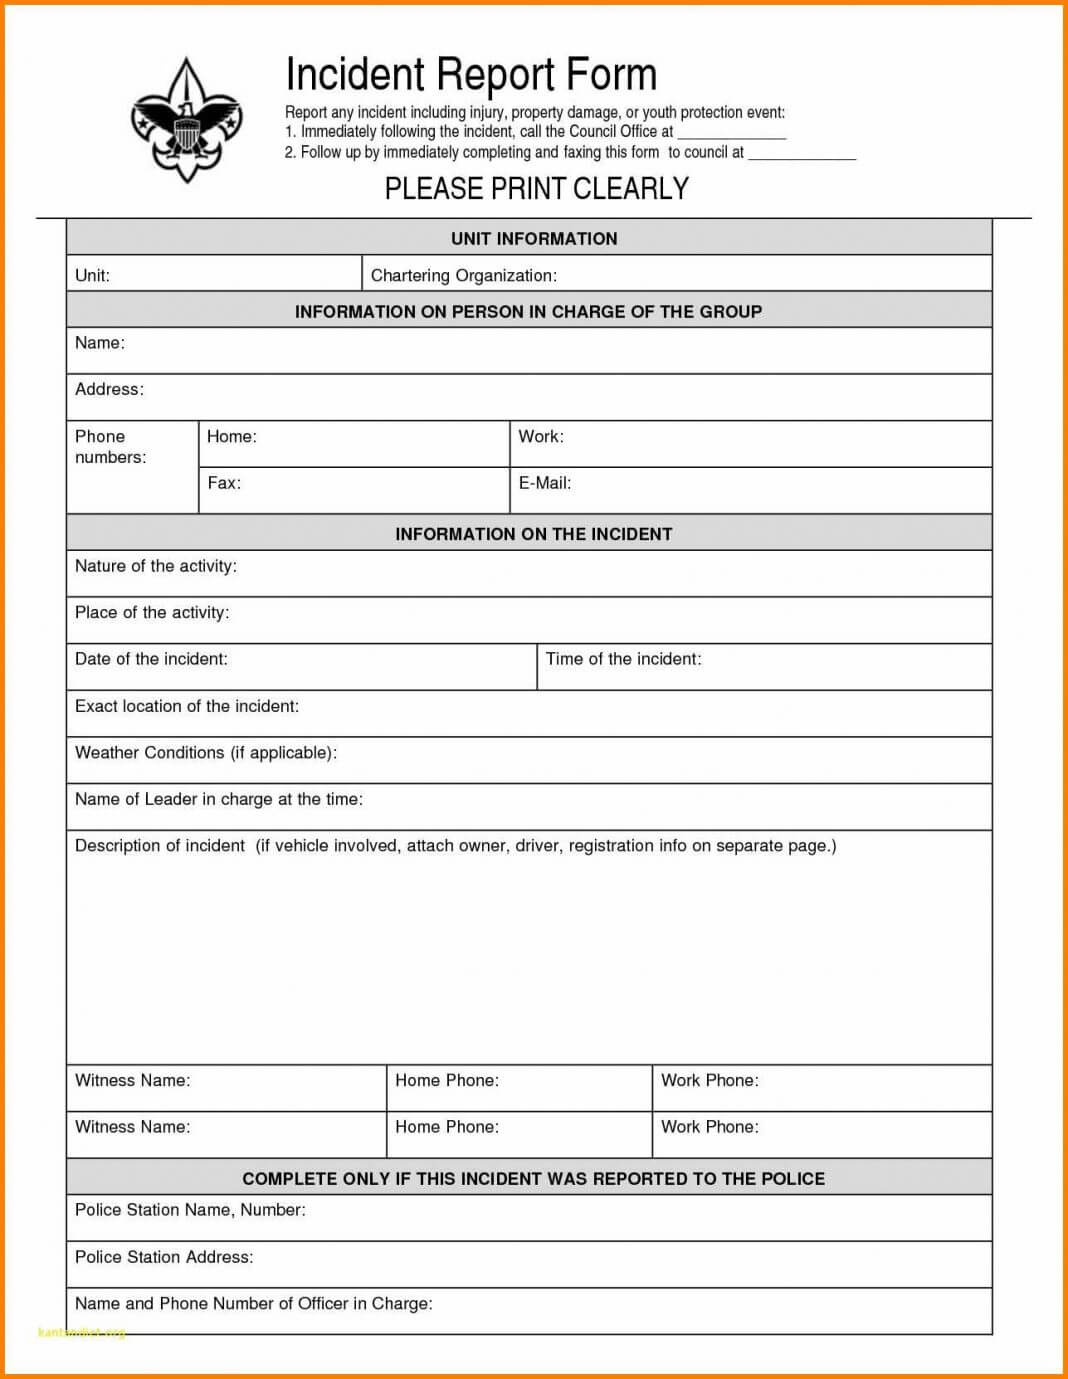 Employee Incident Report Is Your Company In Need For An For Incident Report Form Template Qld